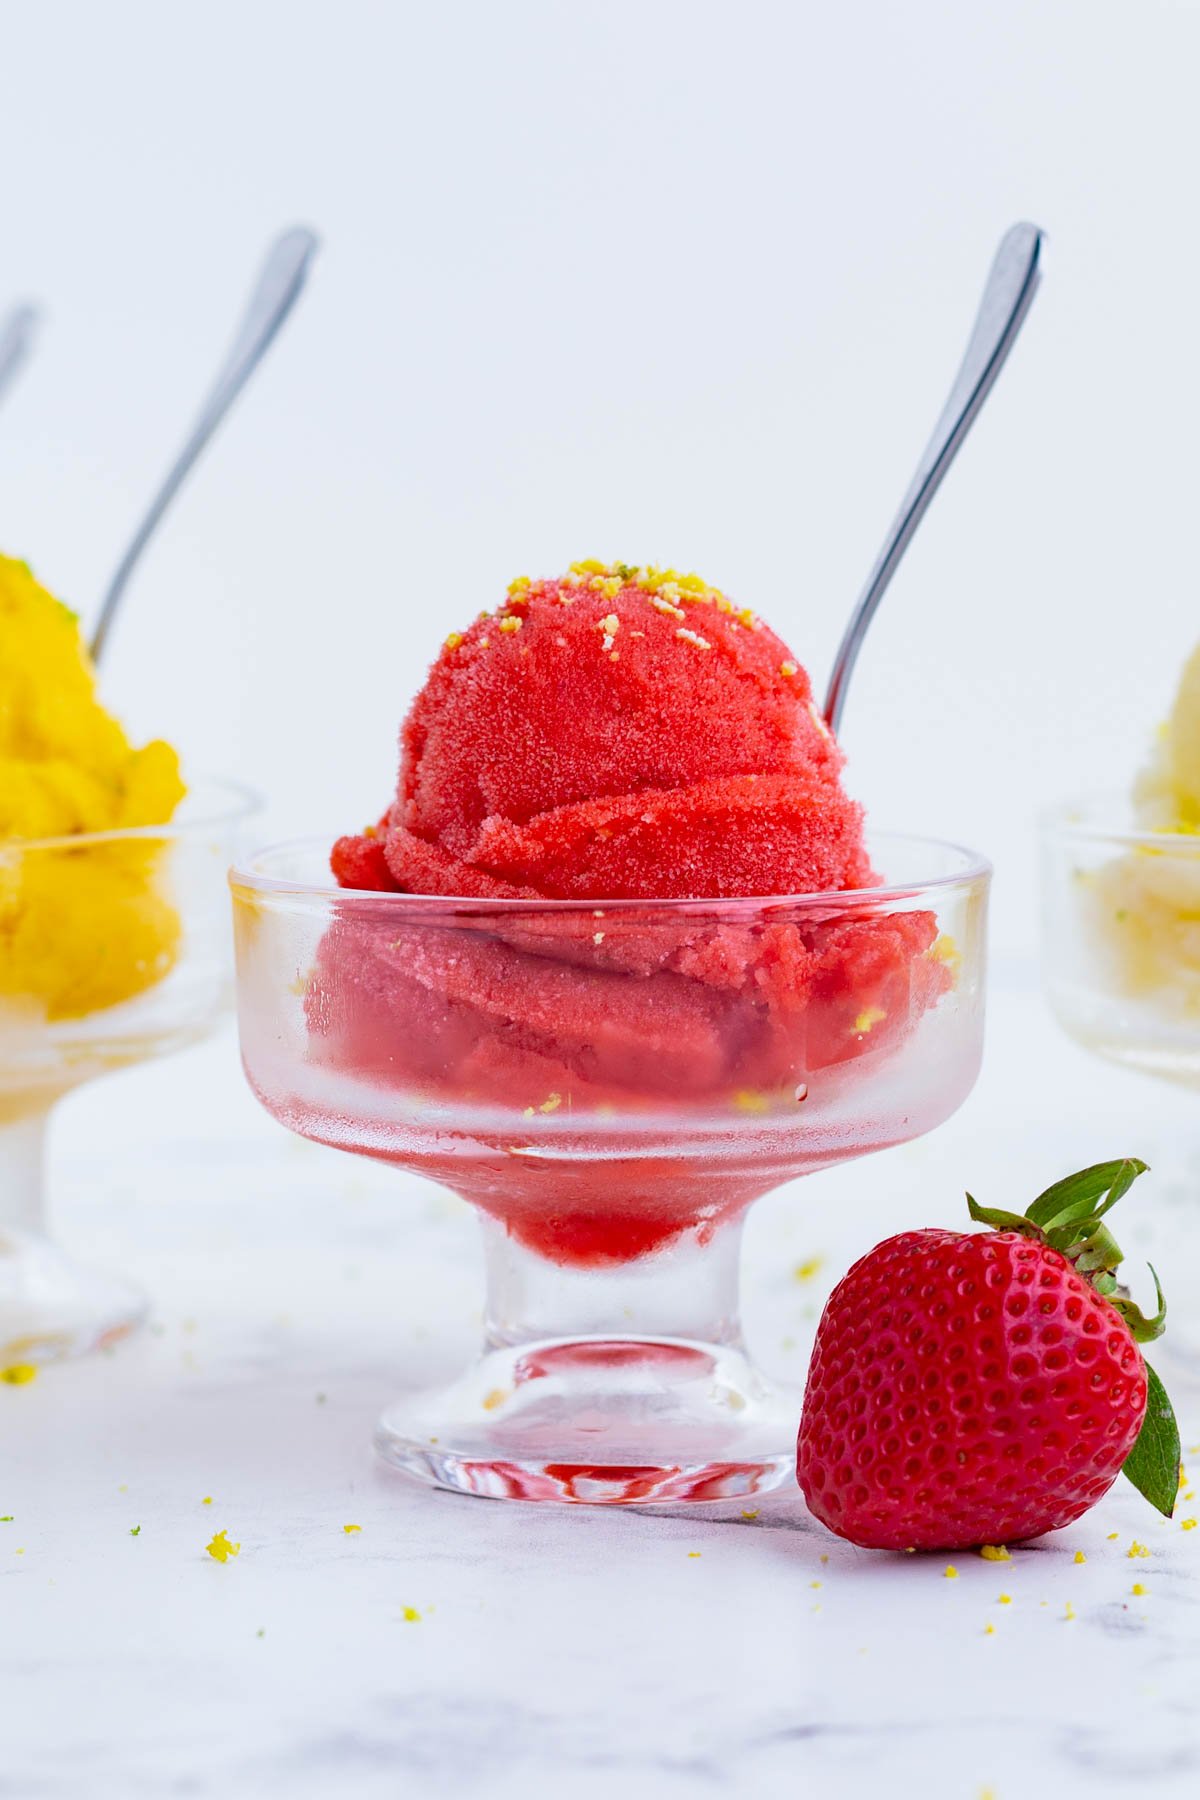 Strawberry sorbet is just one flavorful variety of homemade sorbet.